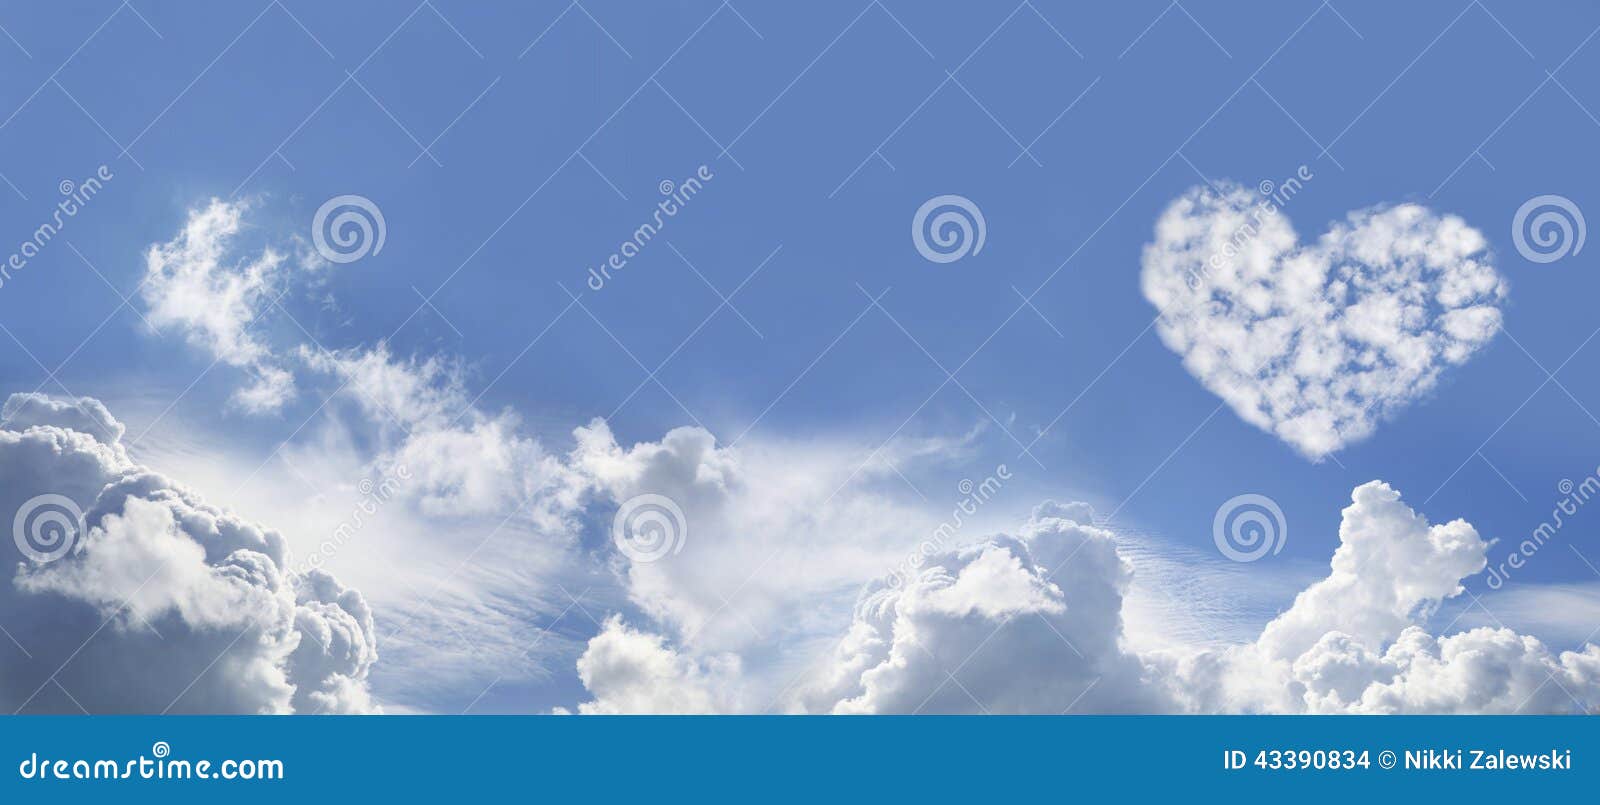 blue sky and love heart d fluffy clouds